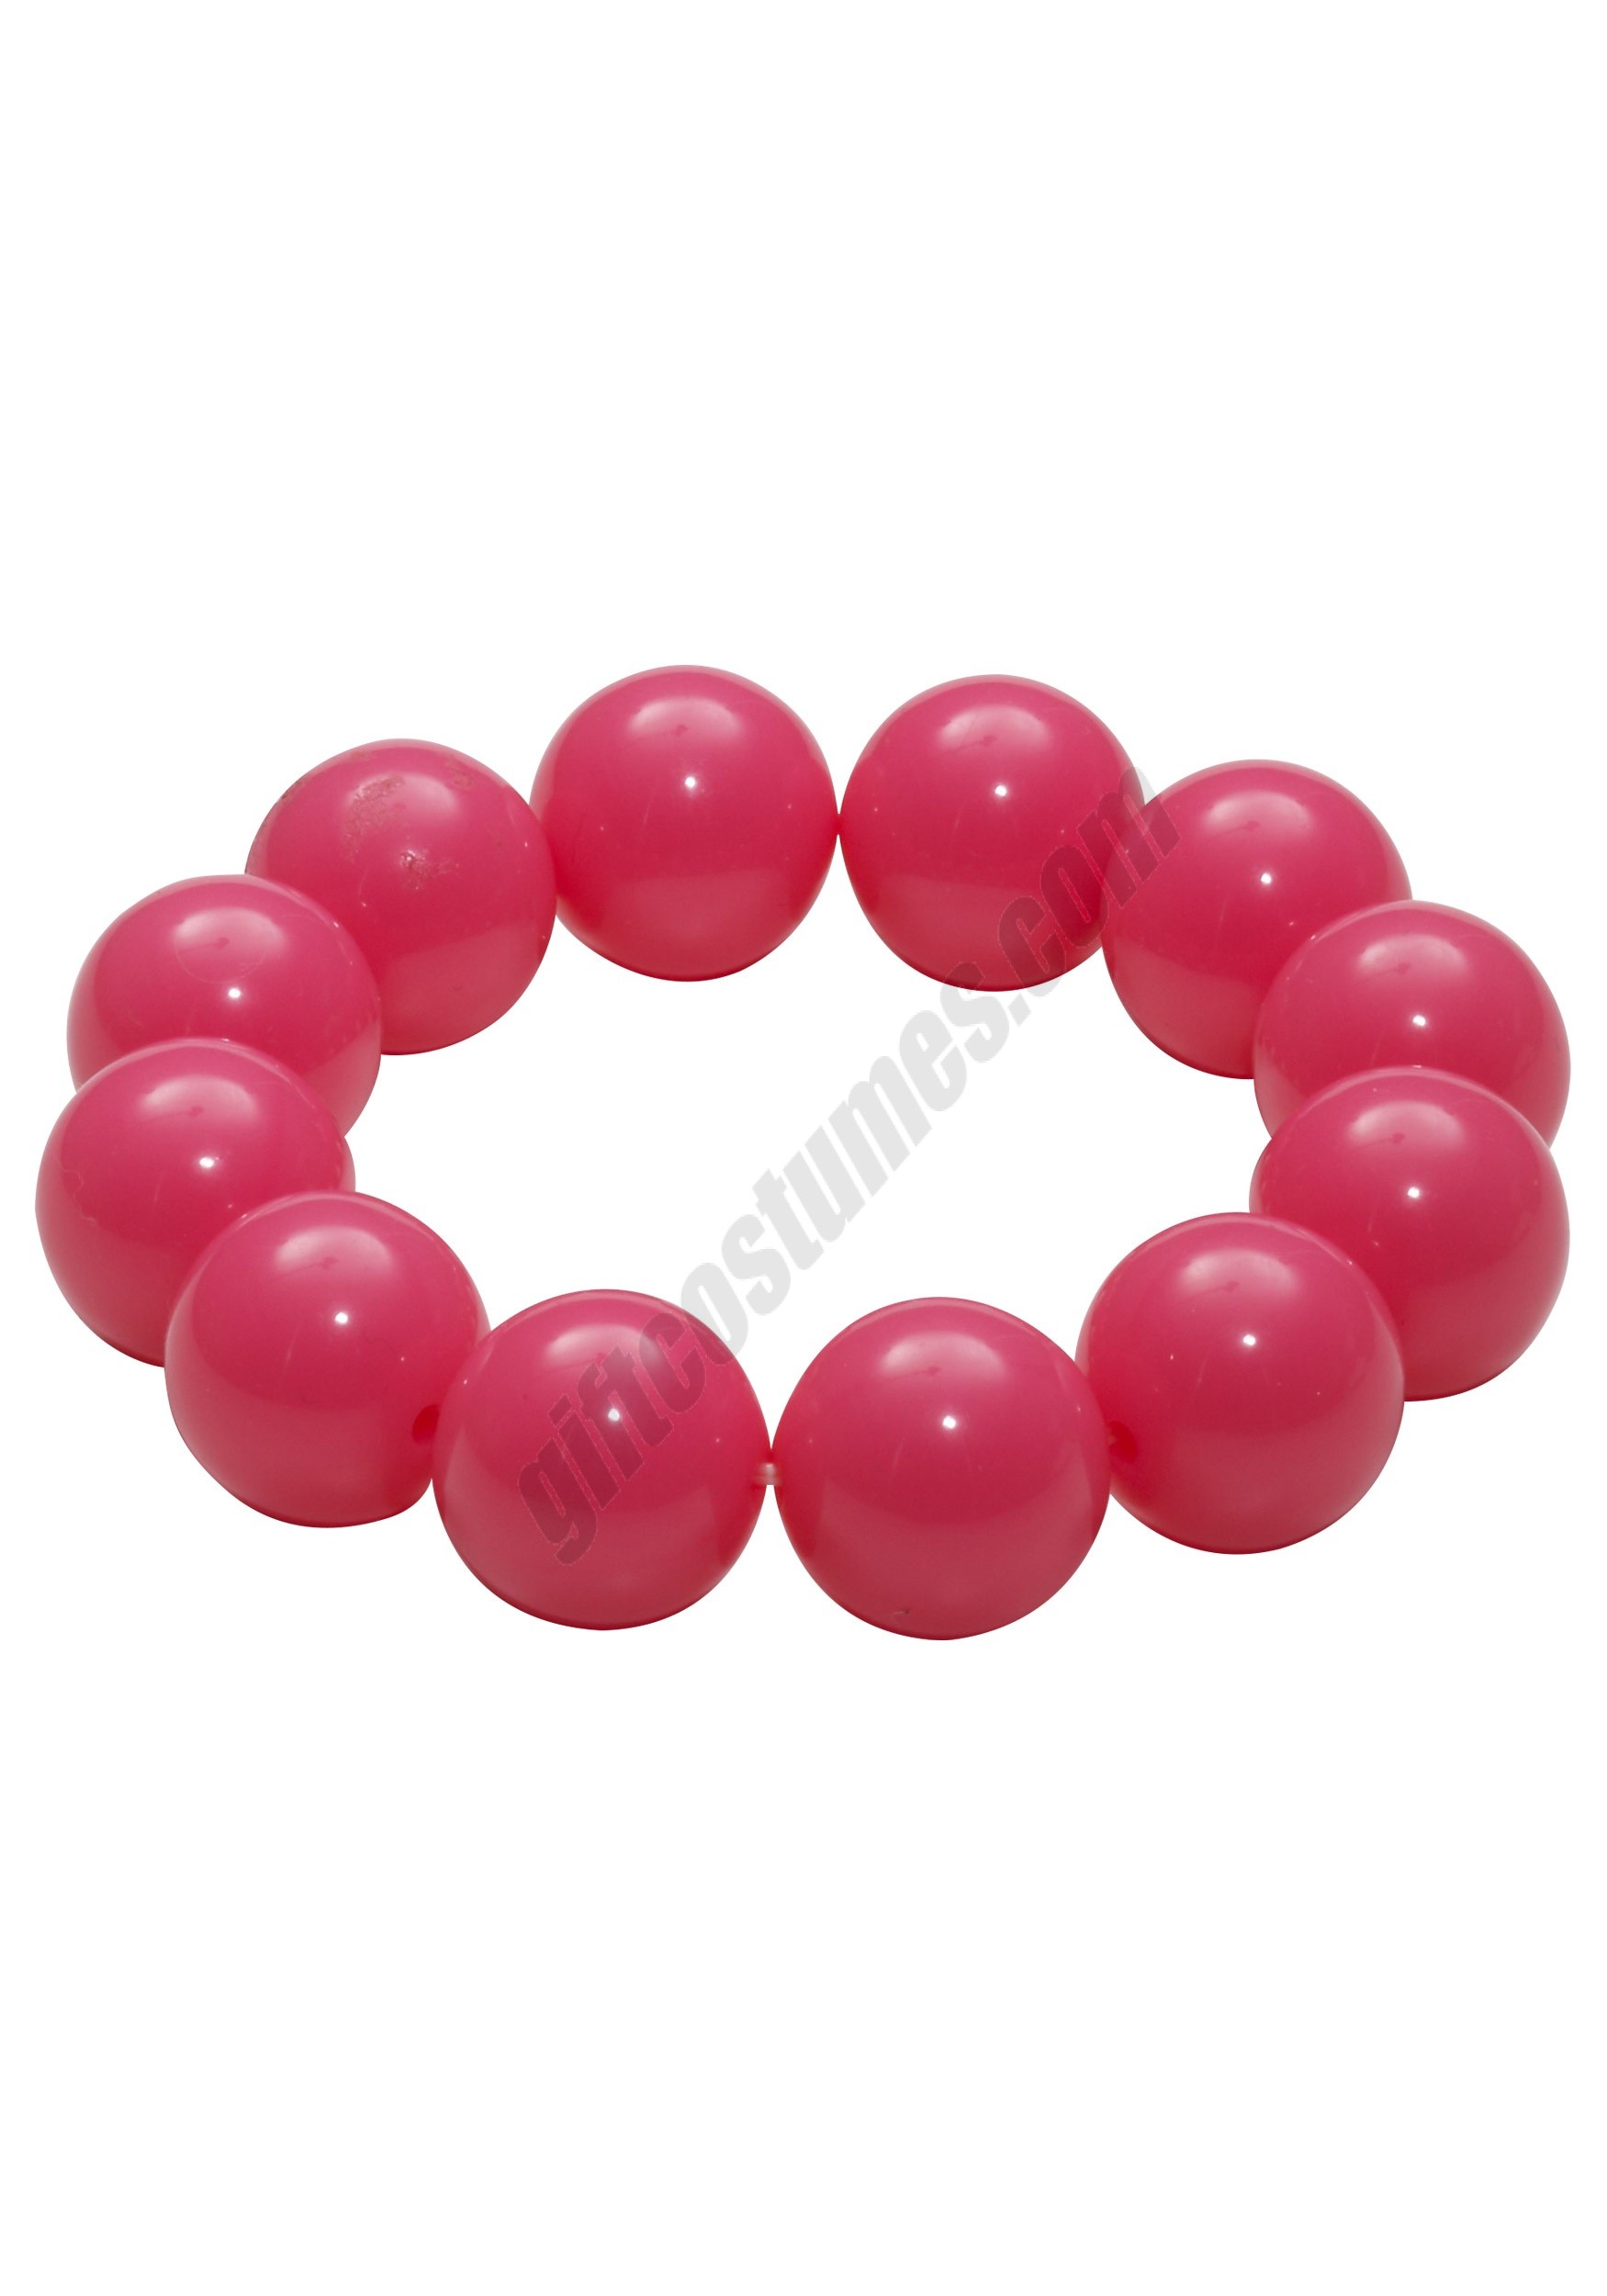 80's Pink Gumball Bracelet Promotions - 80's Pink Gumball Bracelet Promotions